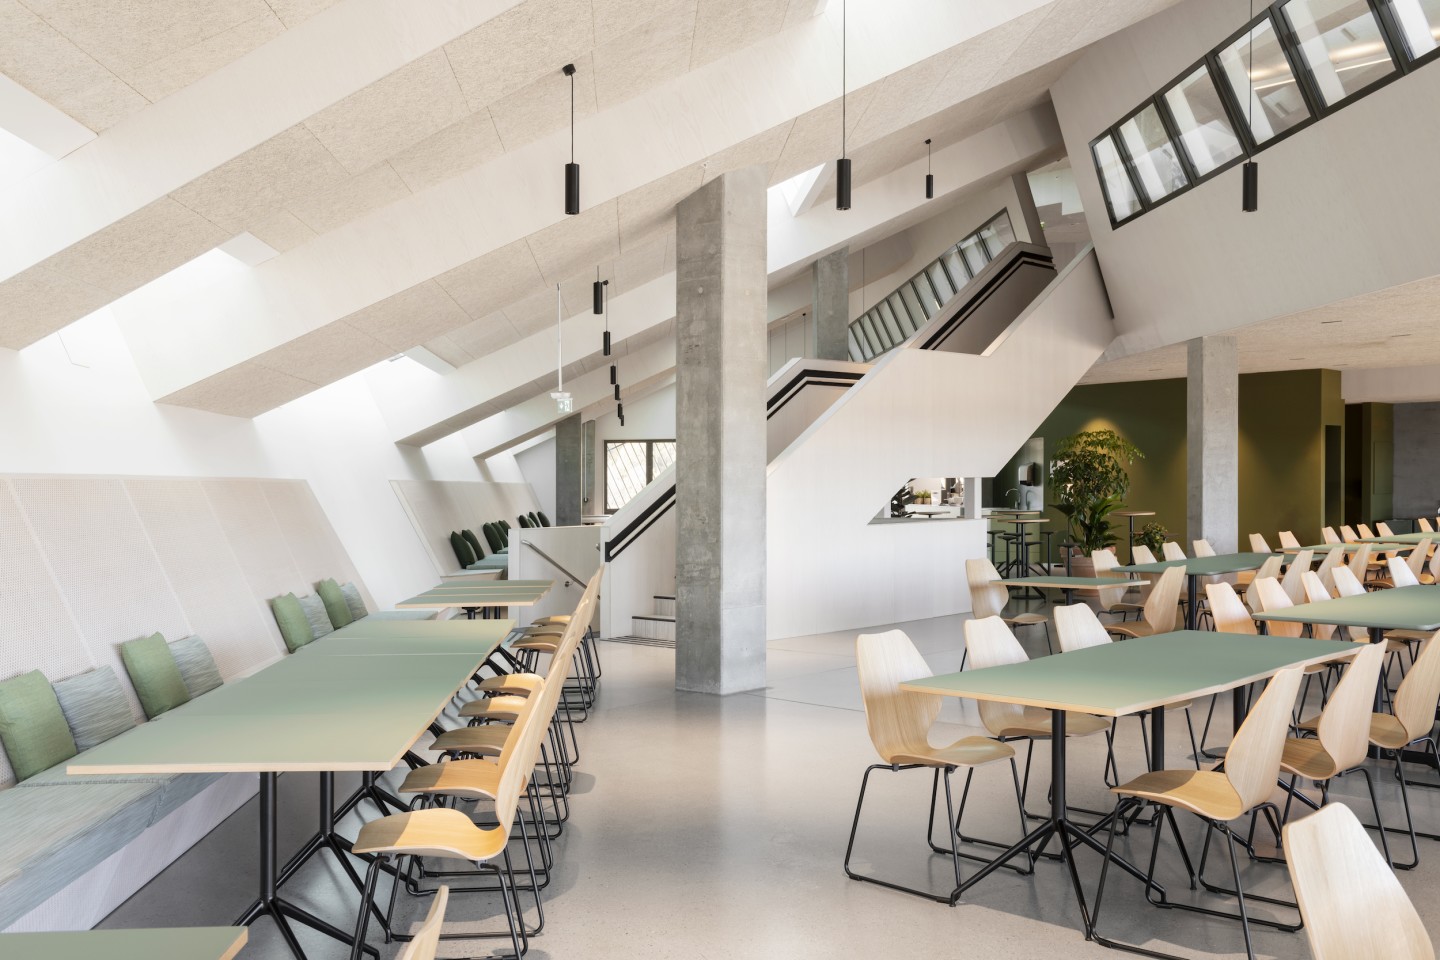 In addition to its office space, Powerhouse Telemark contains a gym, restaurant, and rooftop terrace